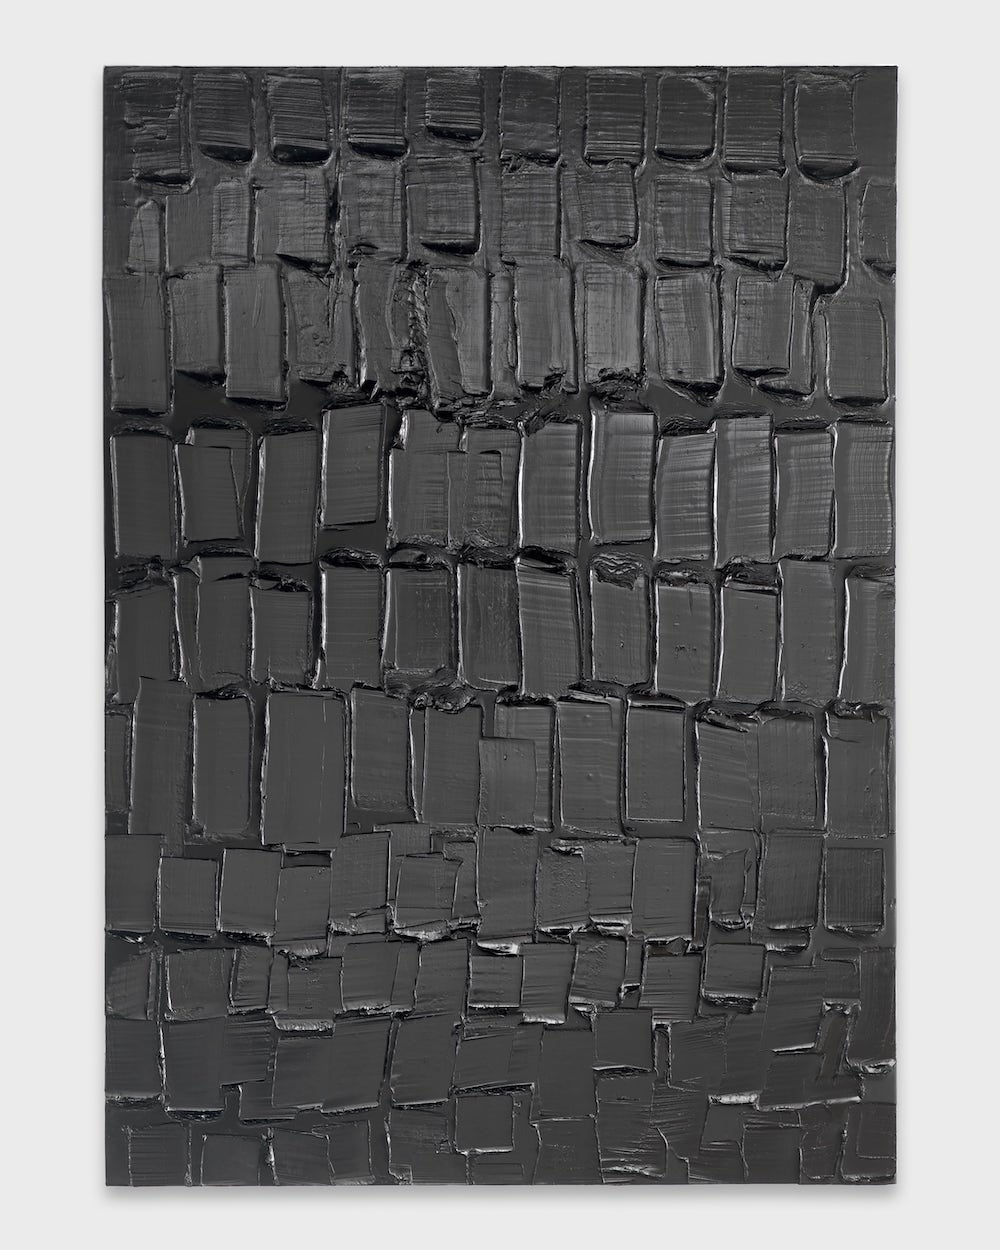 Pierre Soulages Levy Gorvy Dayan